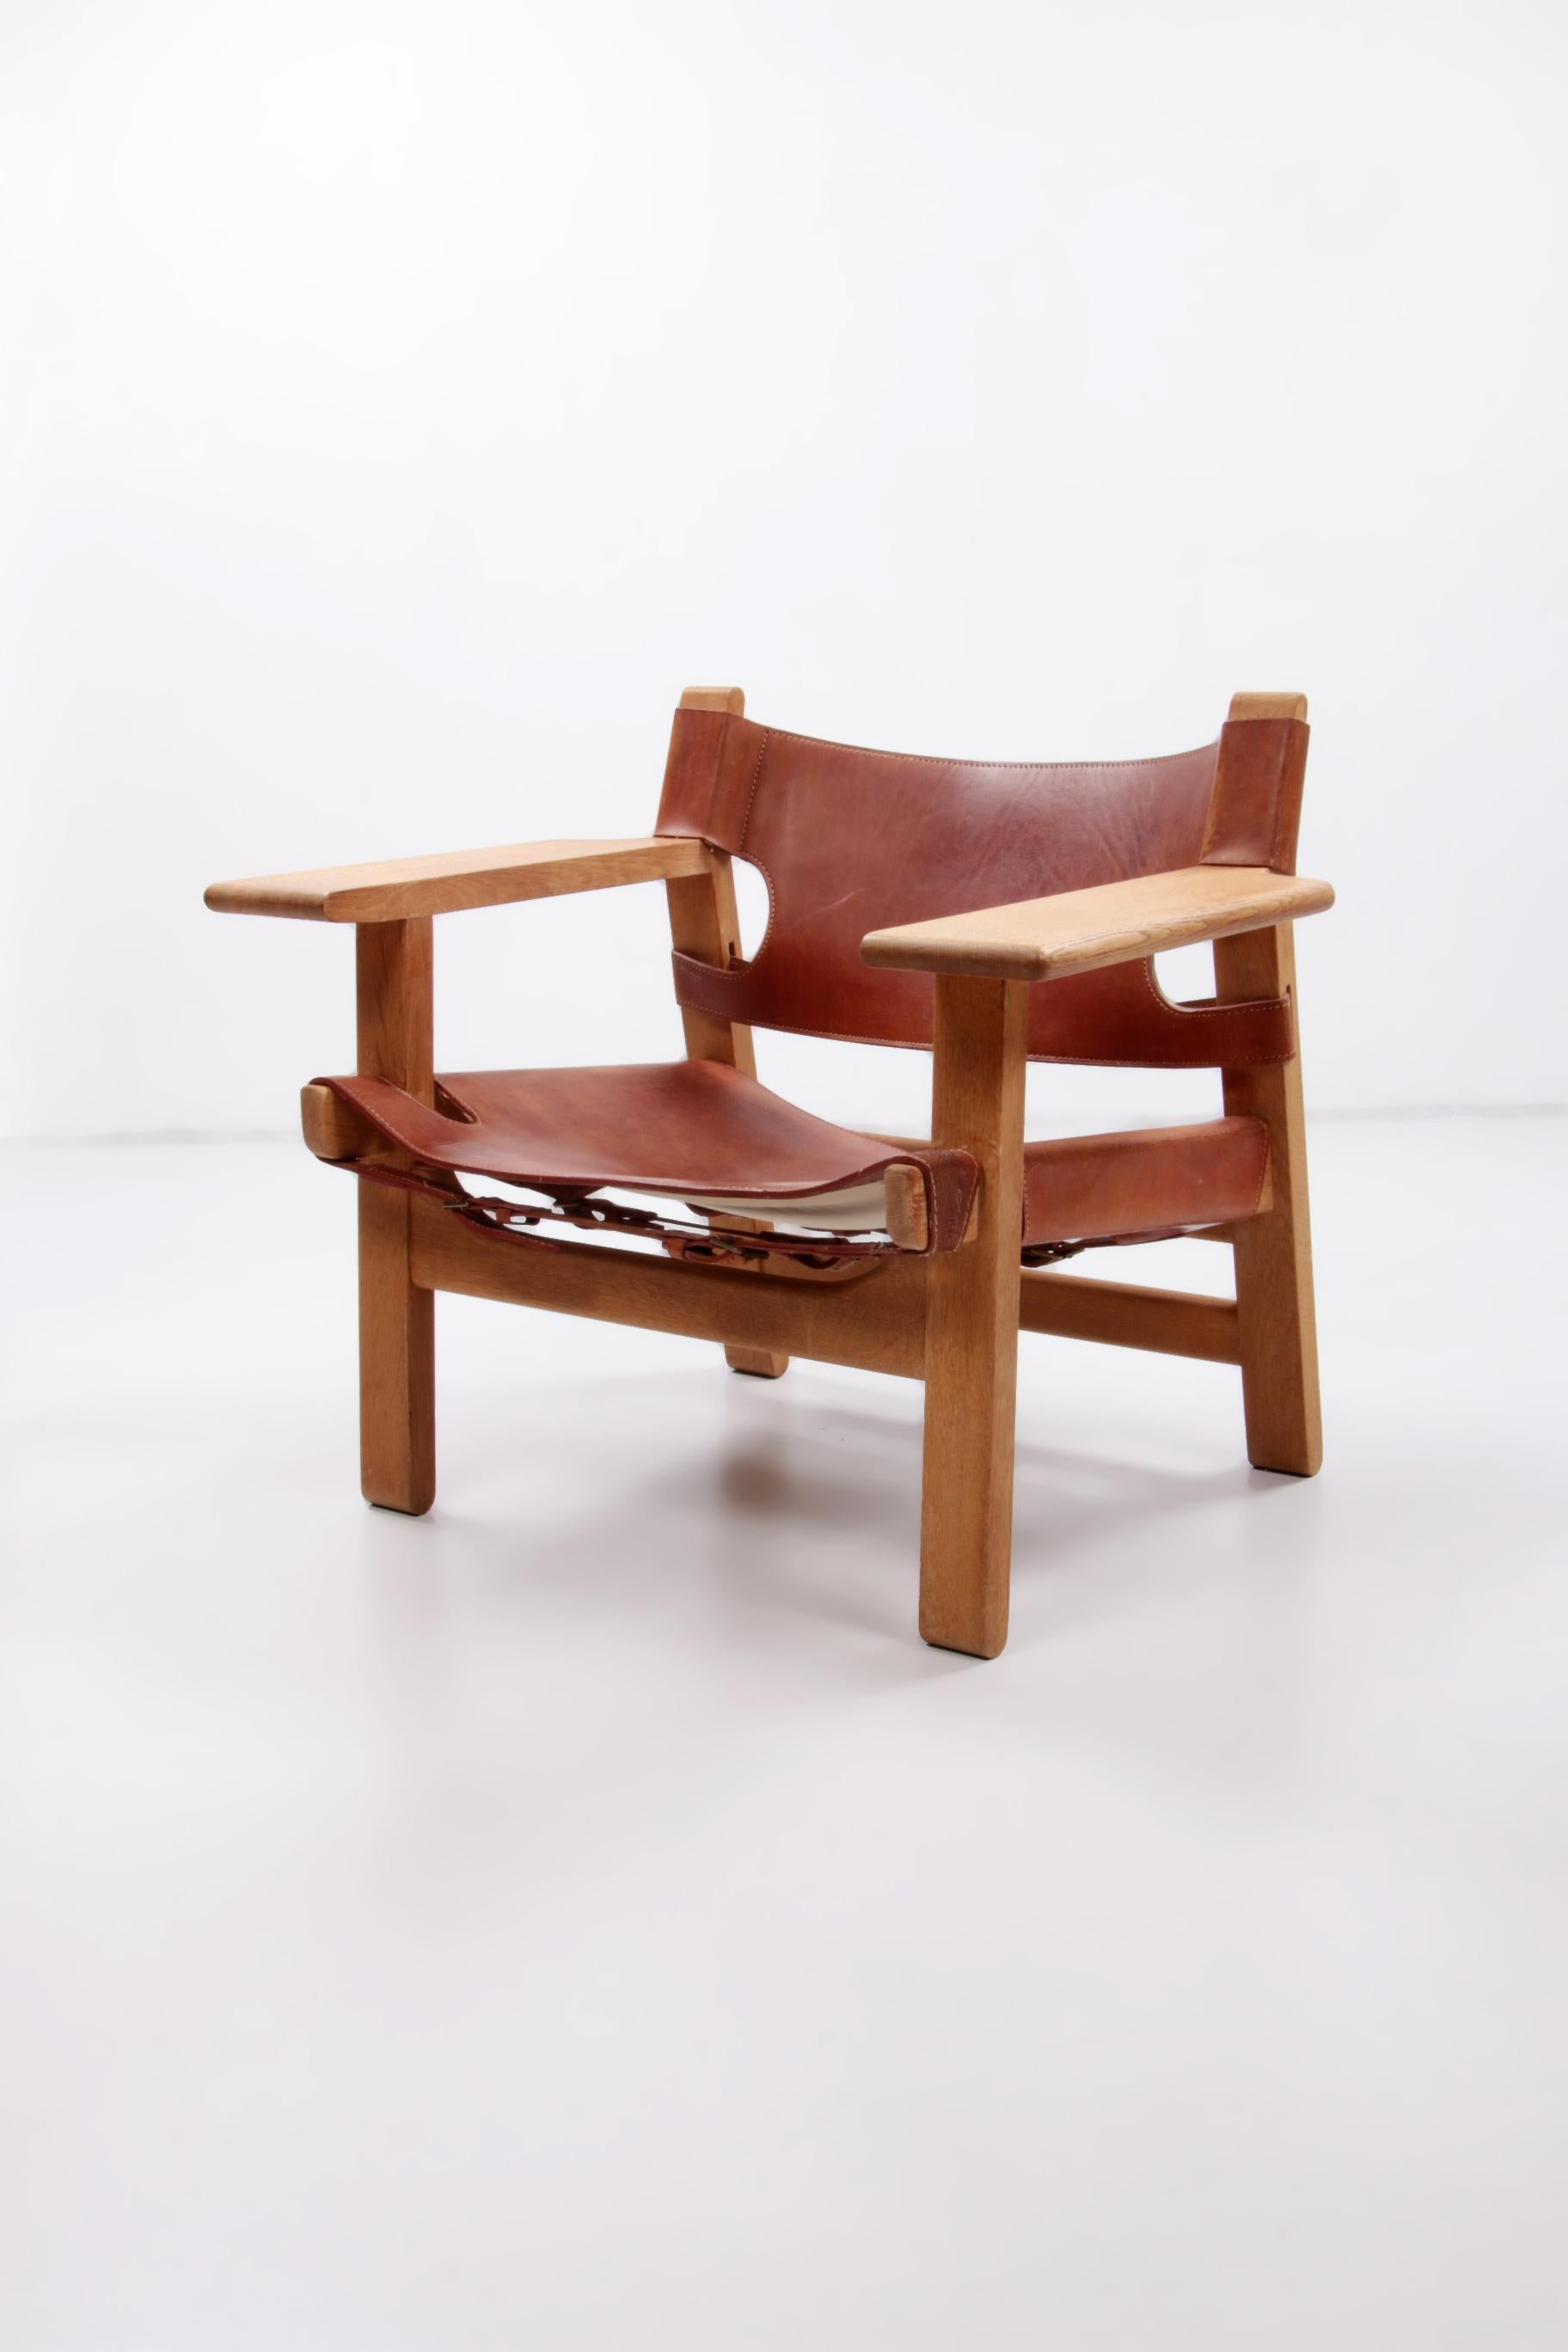 Design chair by Borge Mogensen, also called Spanisch chair, 1960 Denmark.
This original safari chair was made in the 1960s and therefore the saddle leather has a beautiful patina, a very sturdy model with oak frame. Just a topper among the chairs.